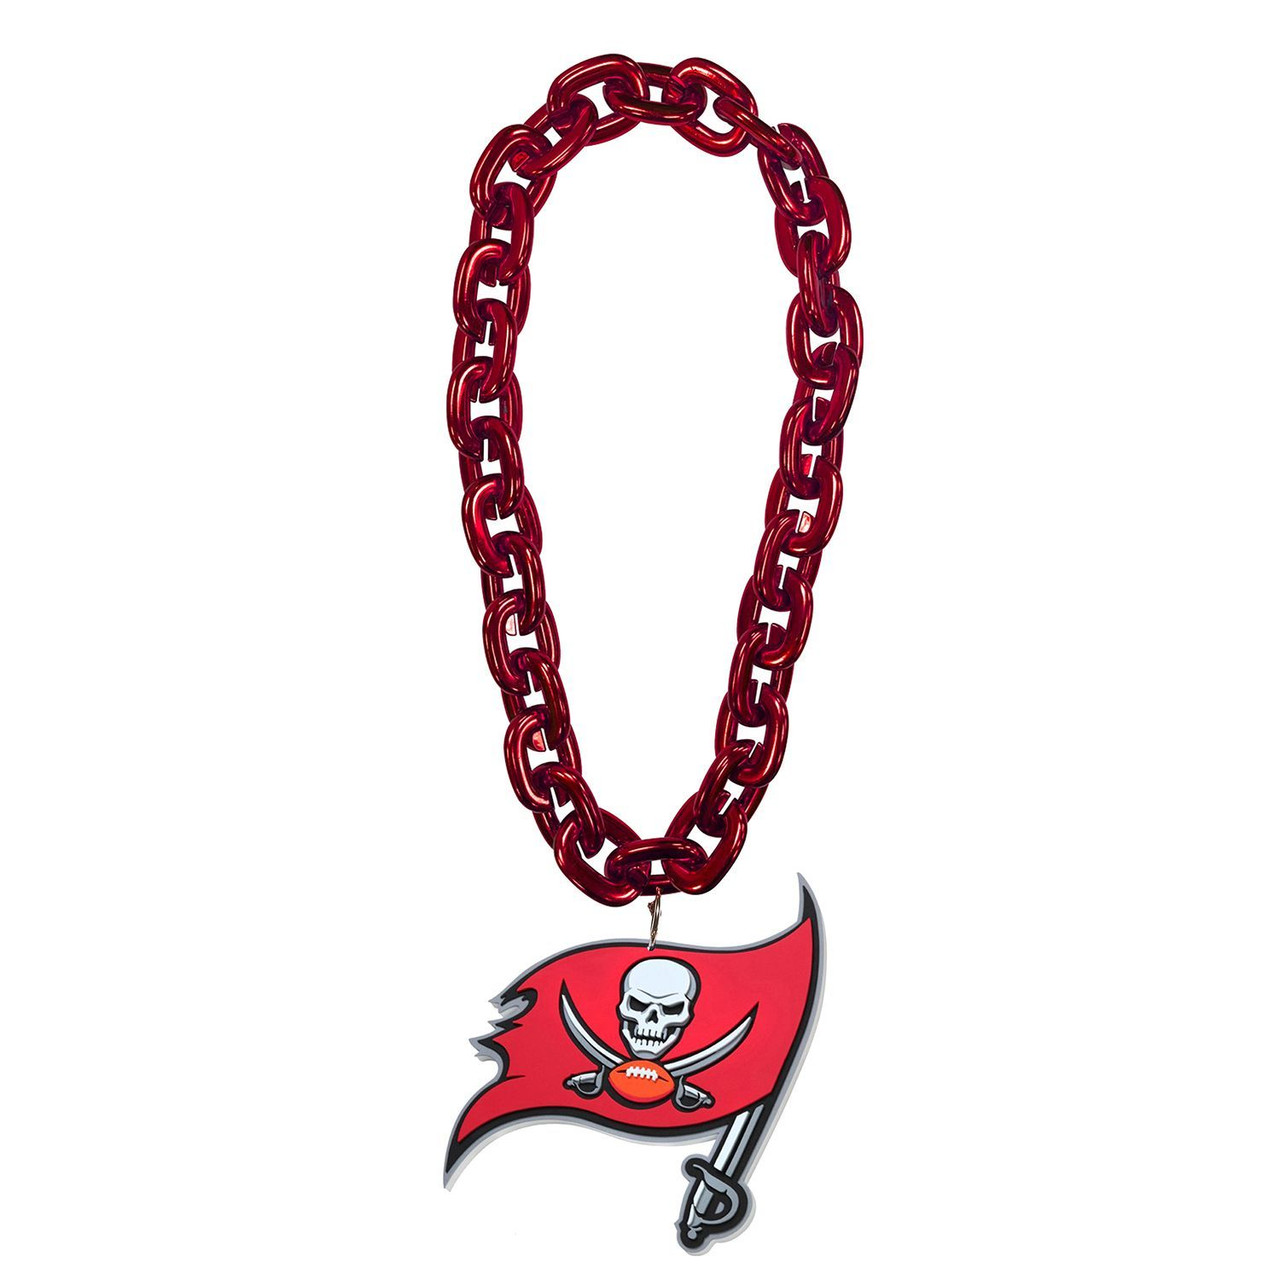 Tampa Bay Buccaneers Fan Chain, Giant Gold Necklace Licensed NFL